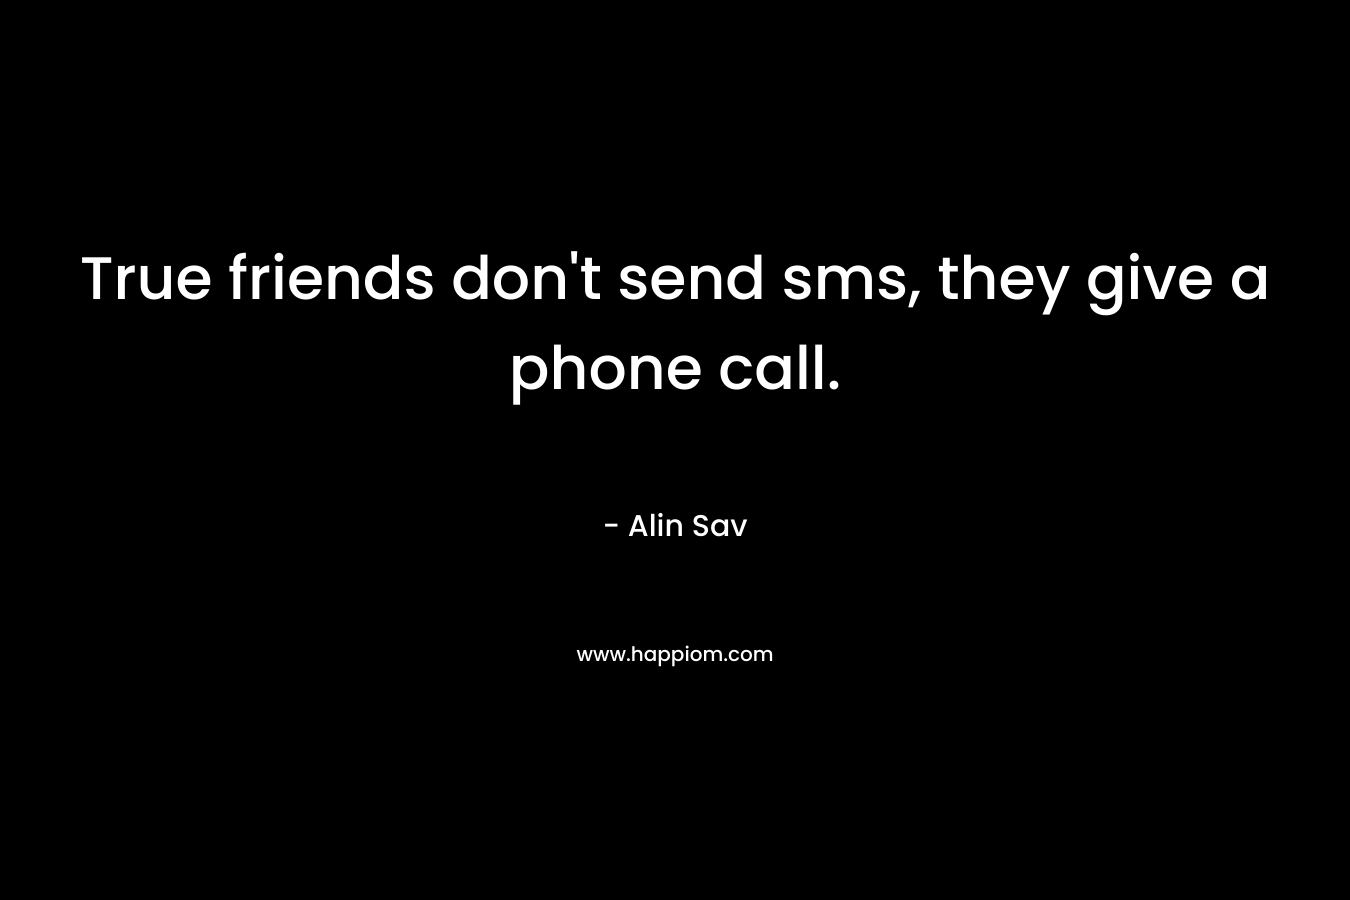 True friends don't send sms, they give a phone call.